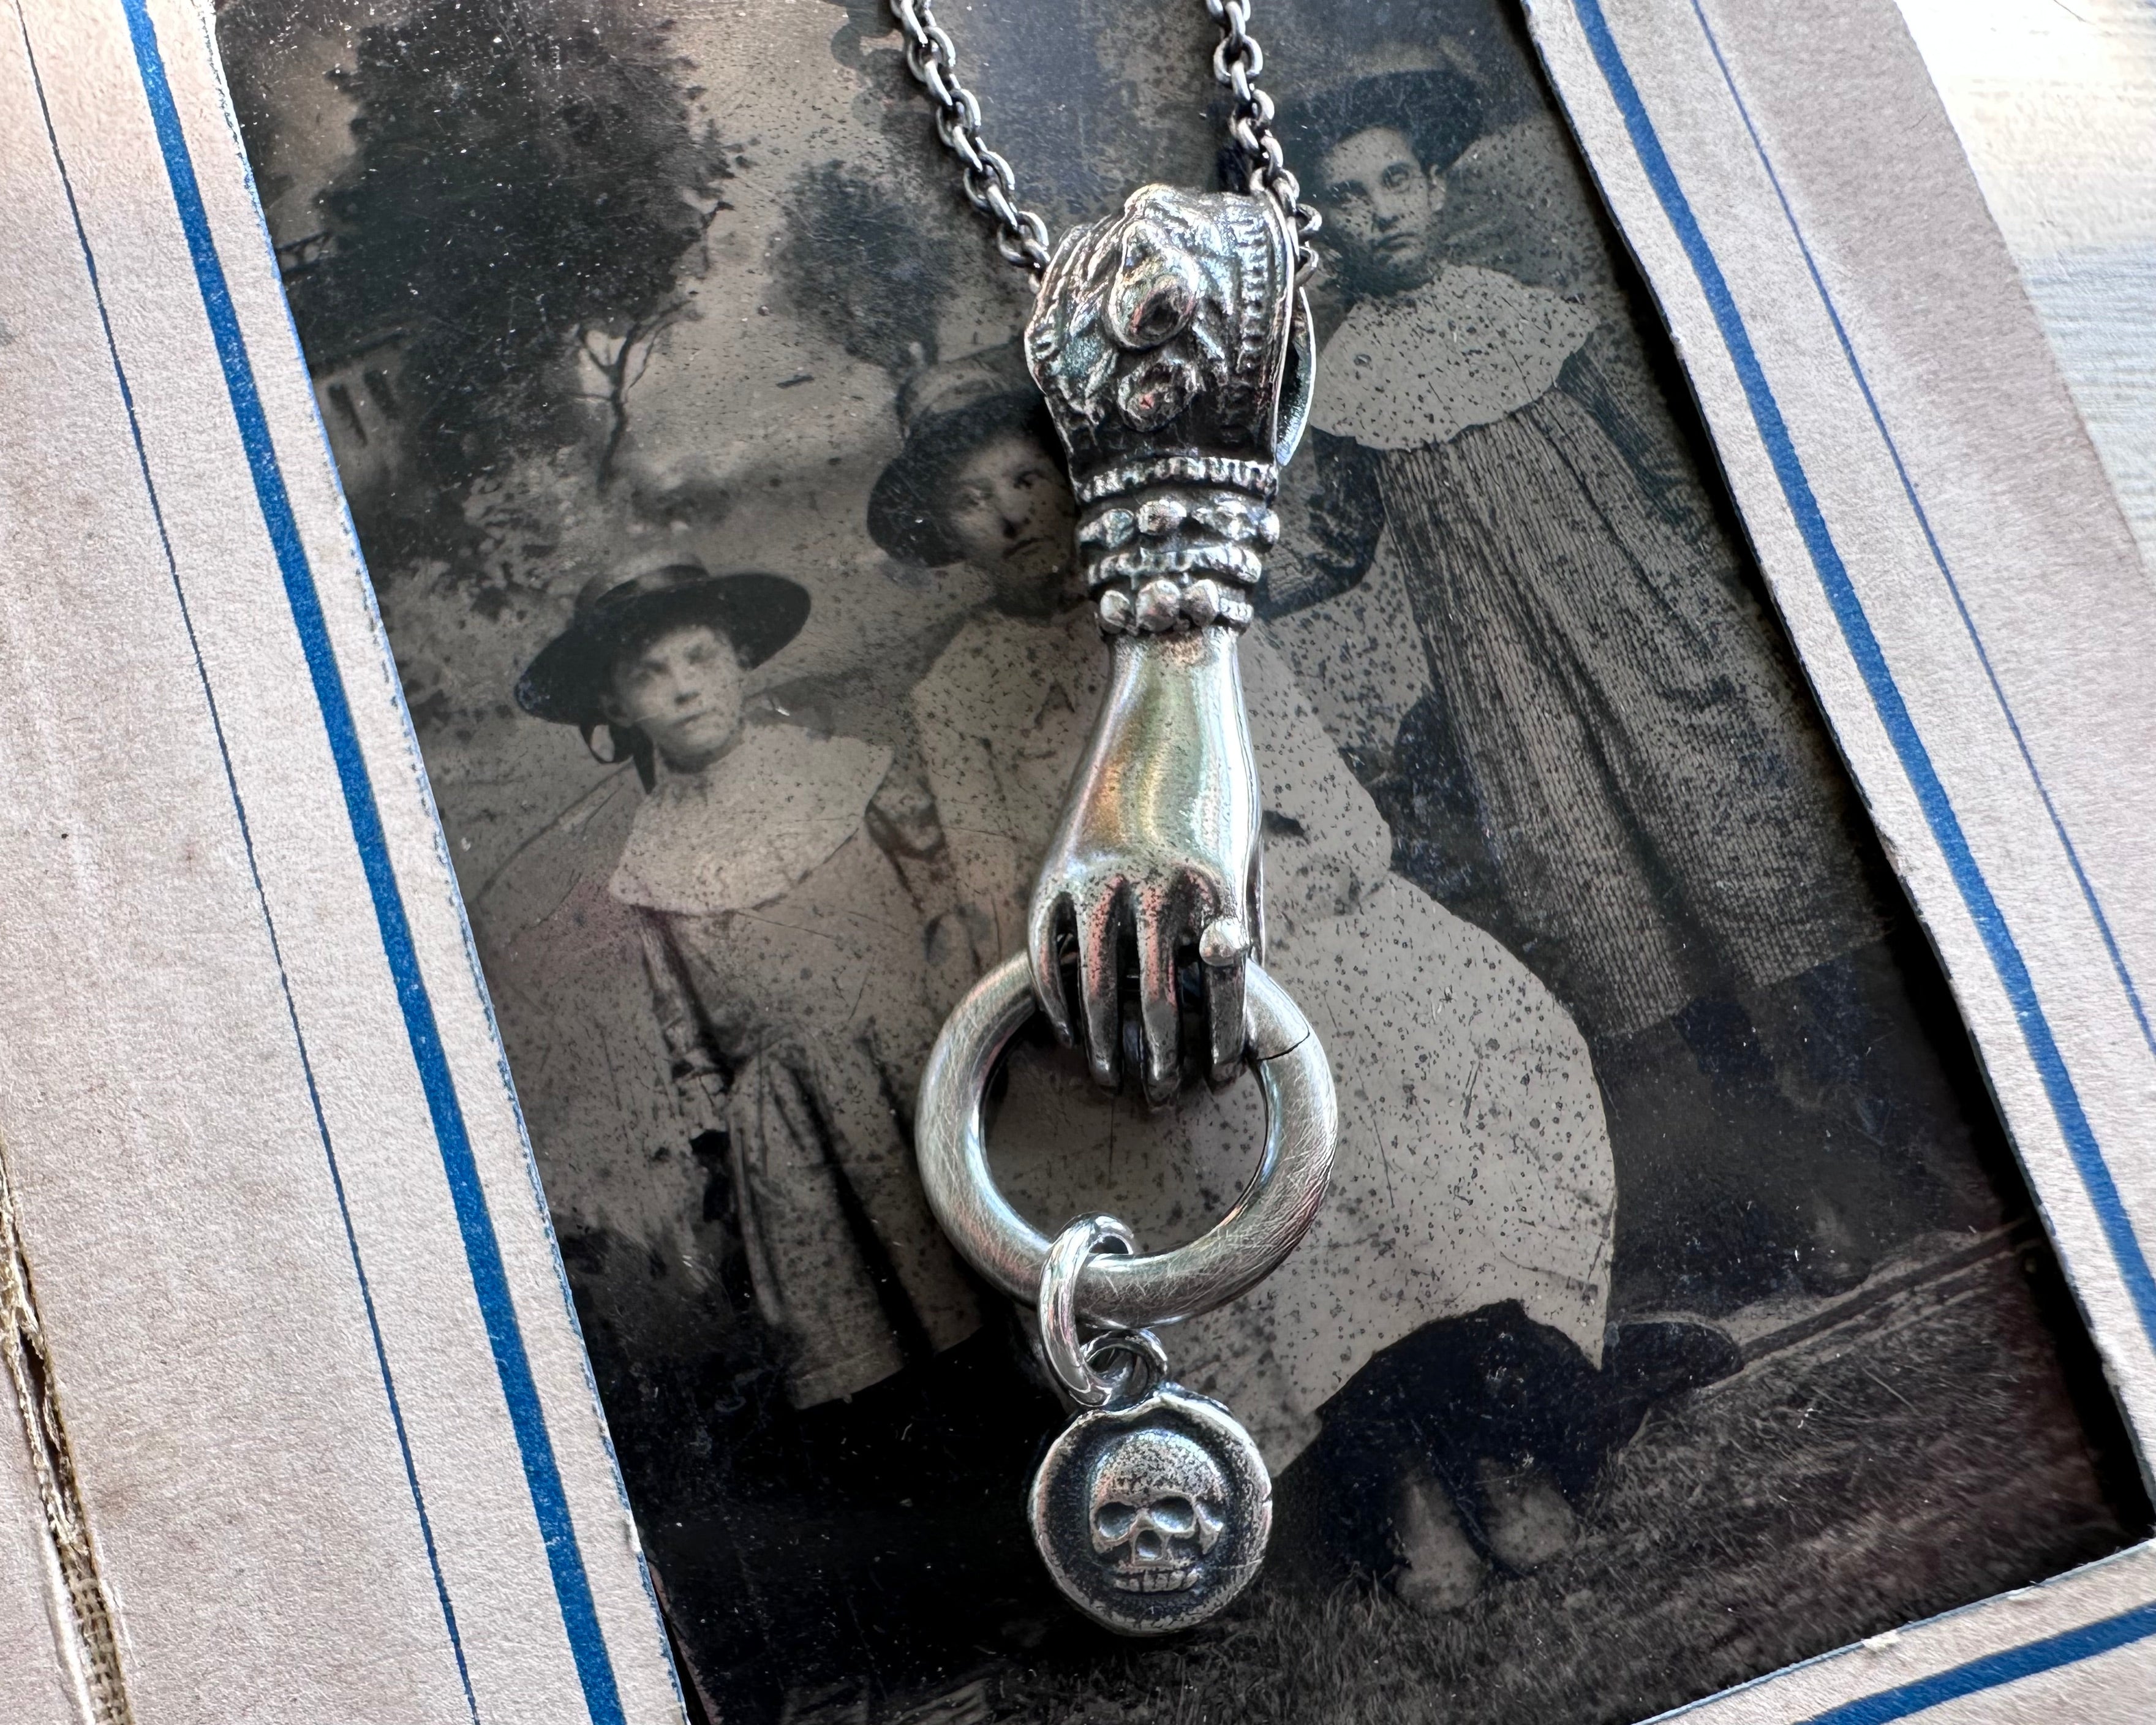 Victorian hand holding charm holder necklace pendant - figural right h